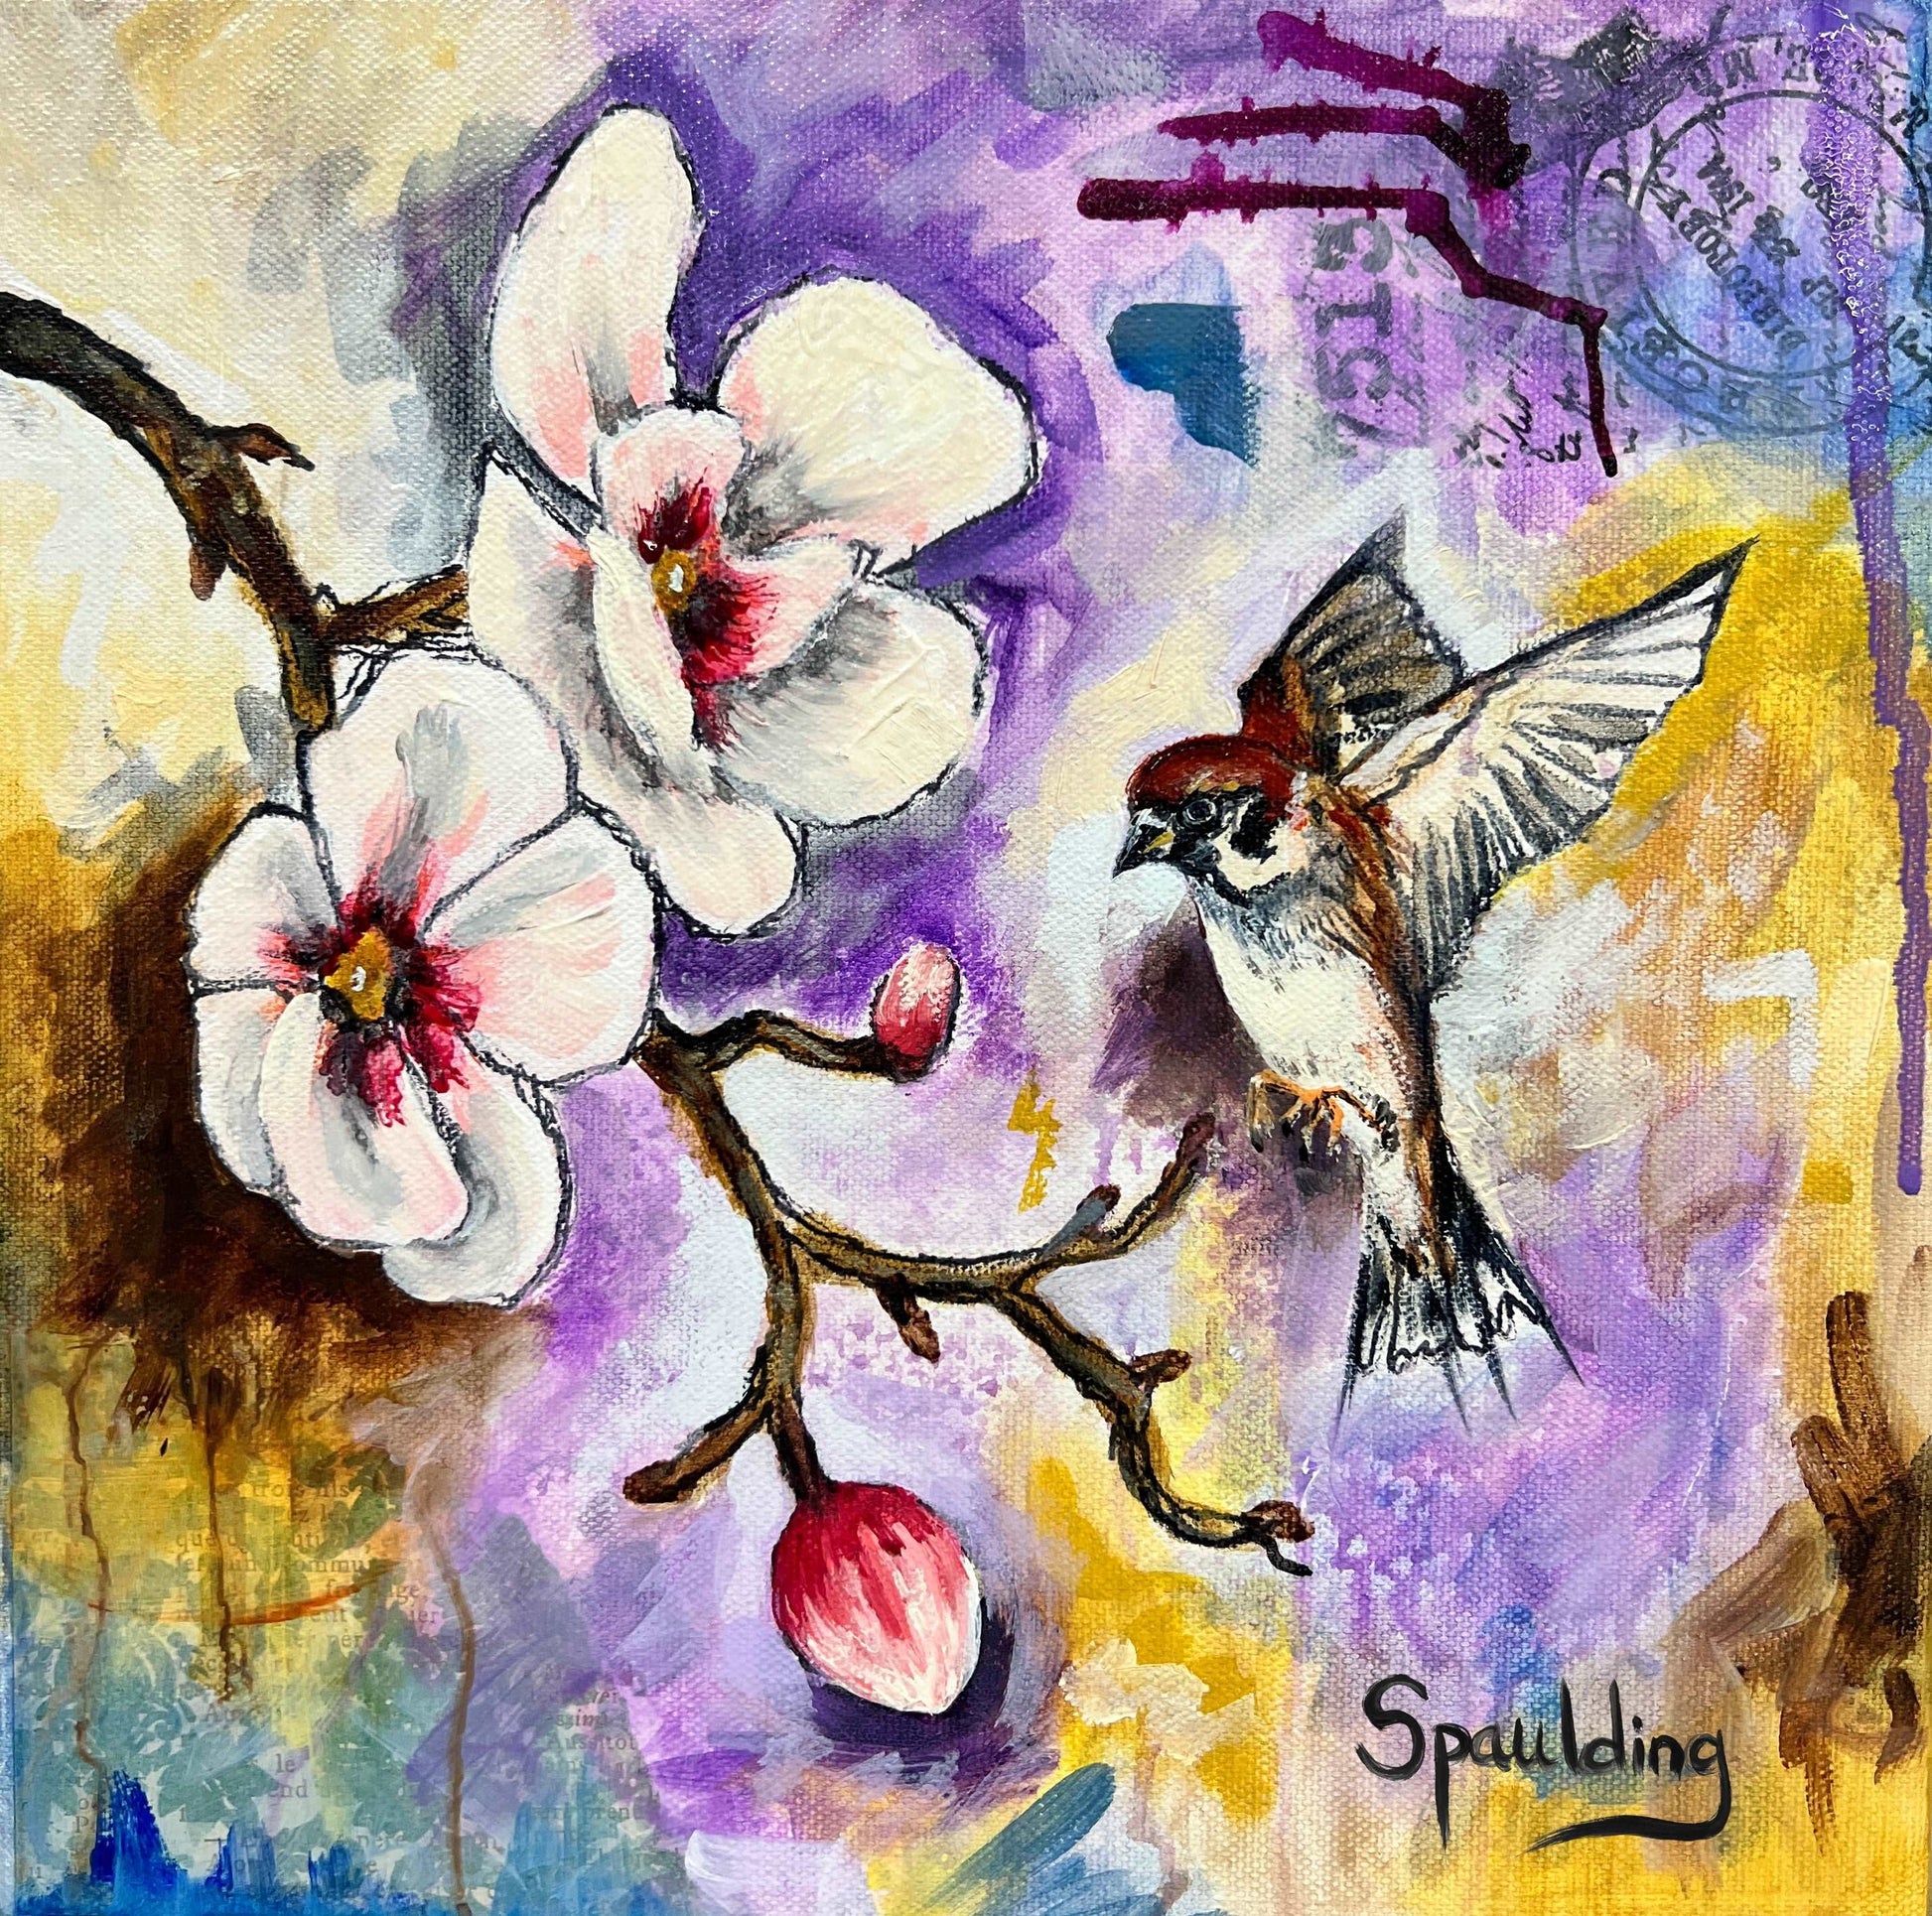  A sparrow in flight beside white blossoms against a vibrant, mixed-media background with postal stamps.